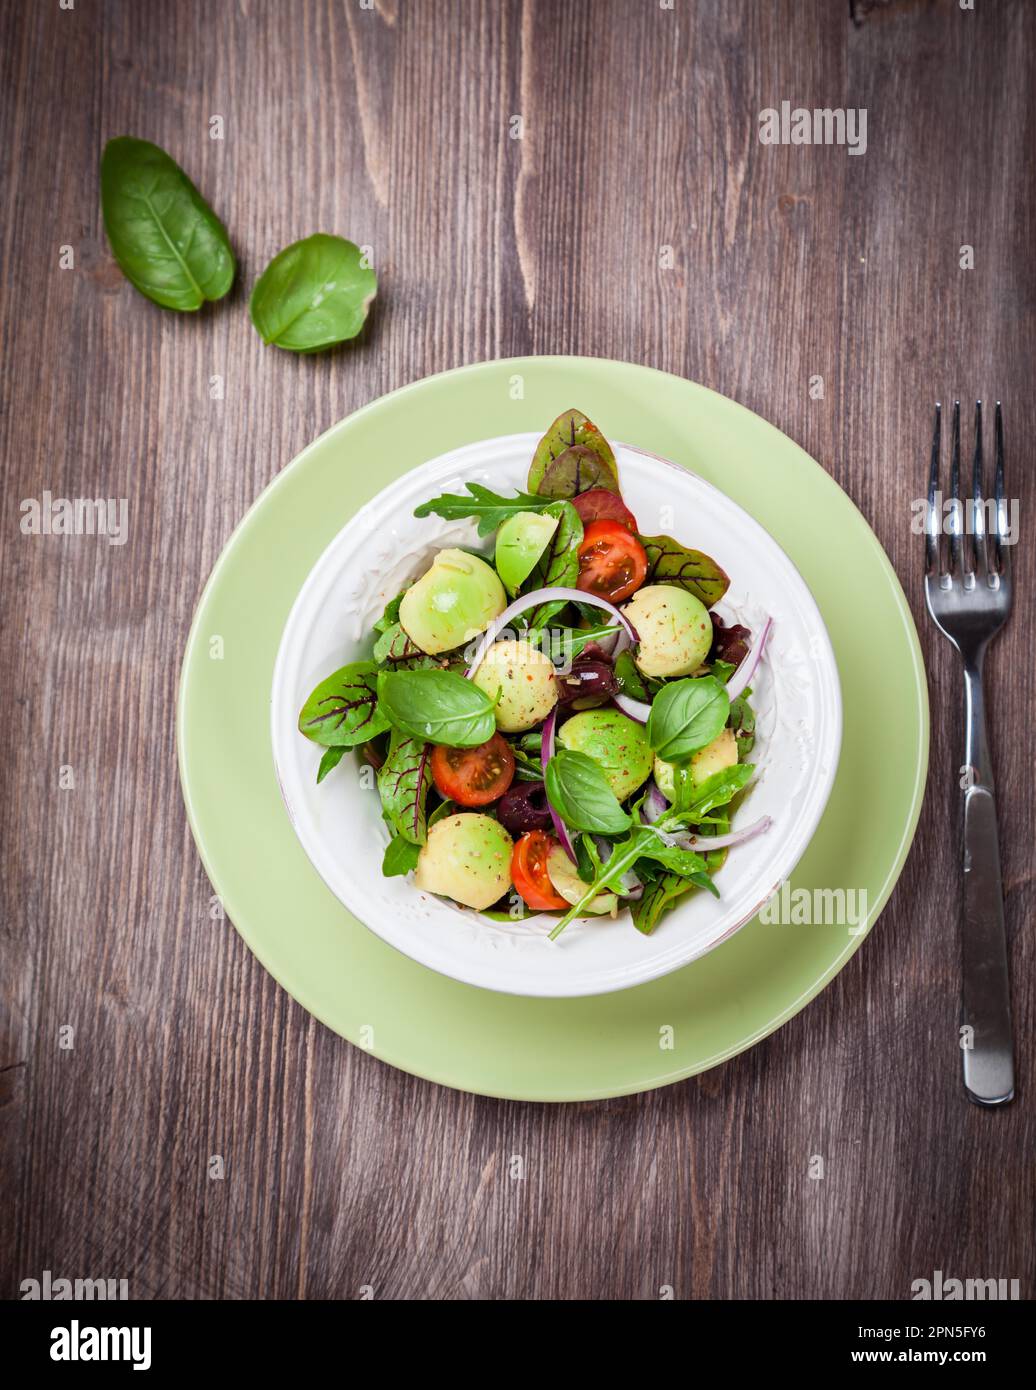 Spring mixed salad with avocado, olives and herbs Stock Photo